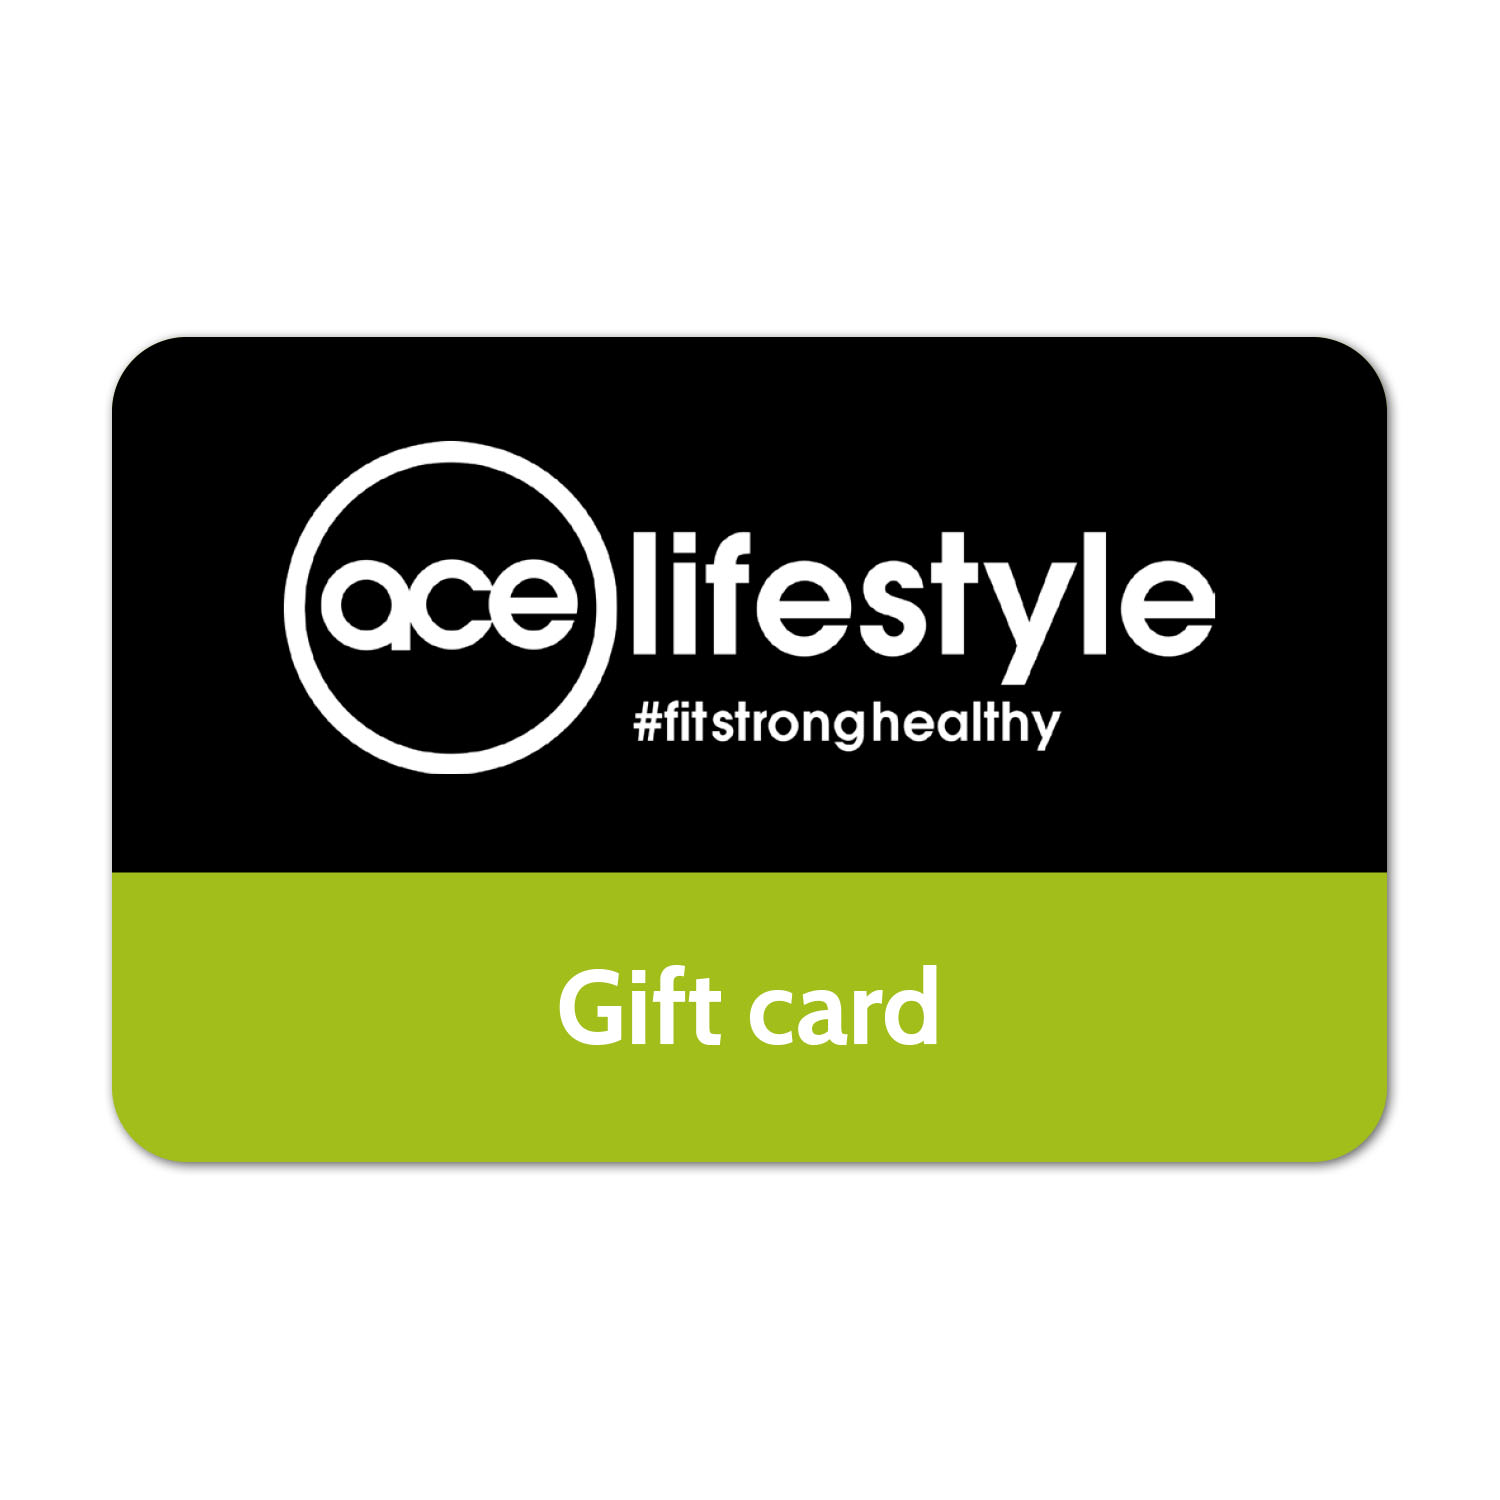 ace Gift card - ace lifestyle